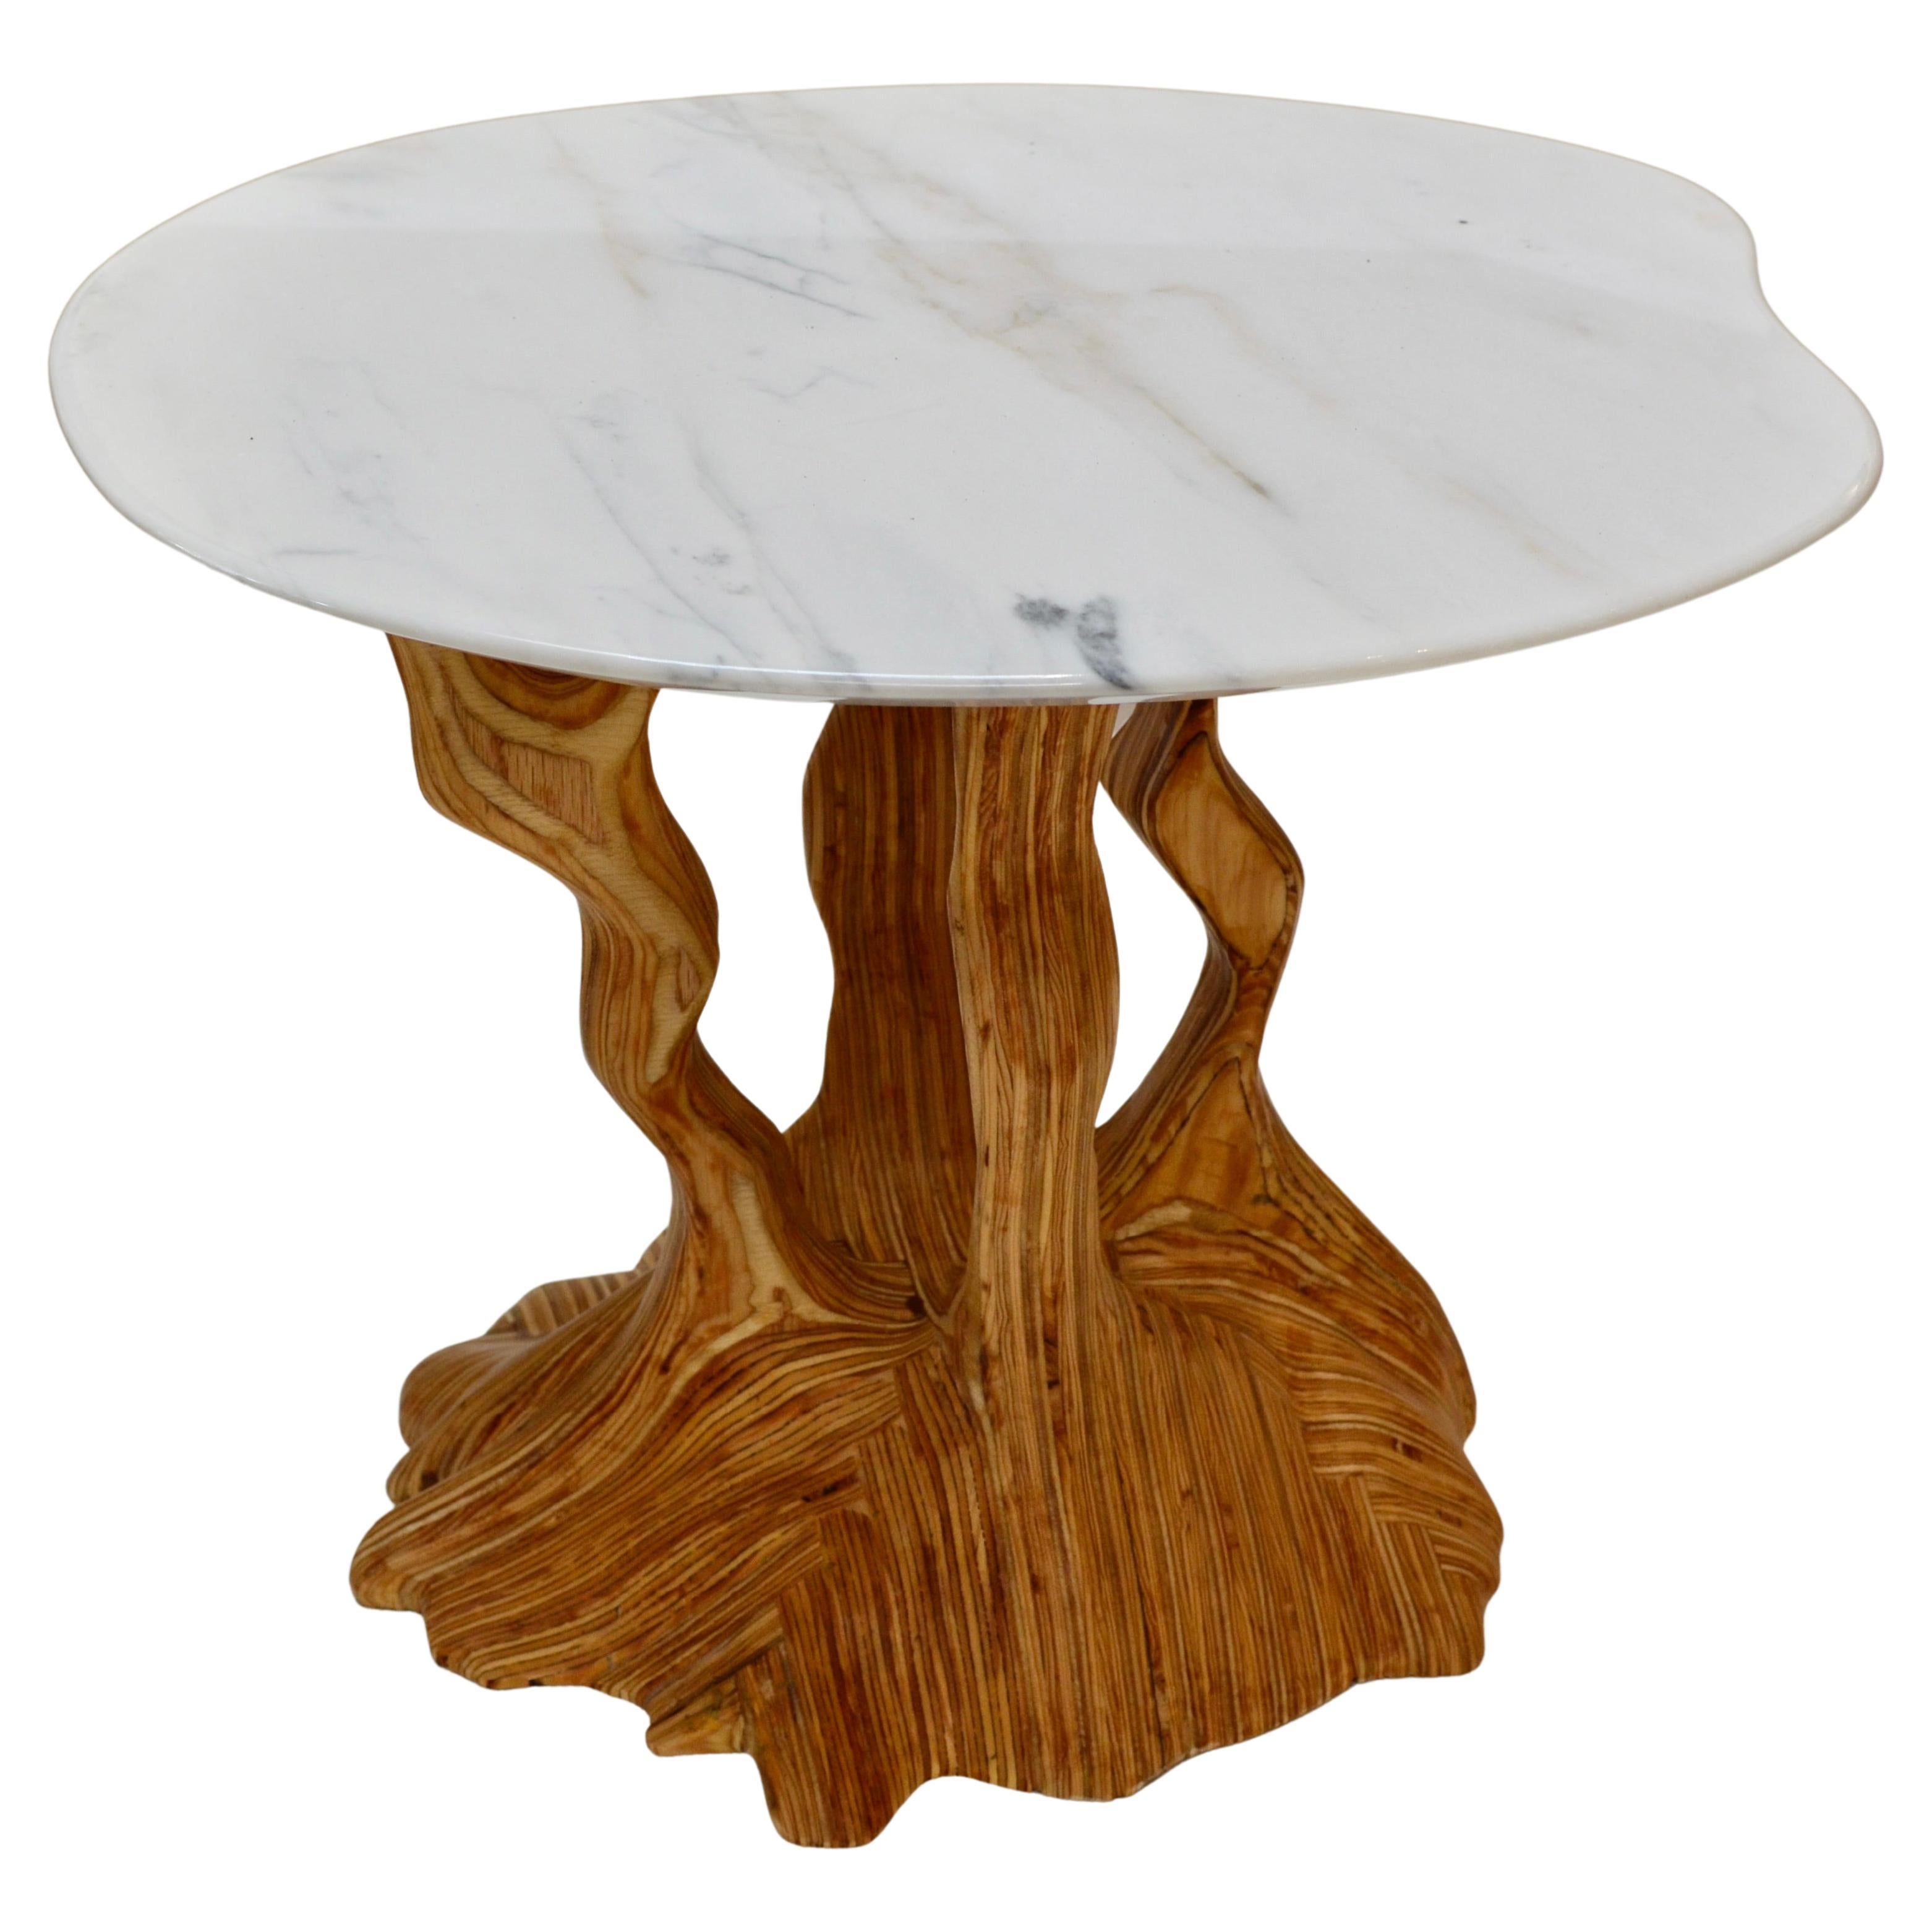 Contemporary Sculpted Wooden Side Table with Asymmetrical Marble Top